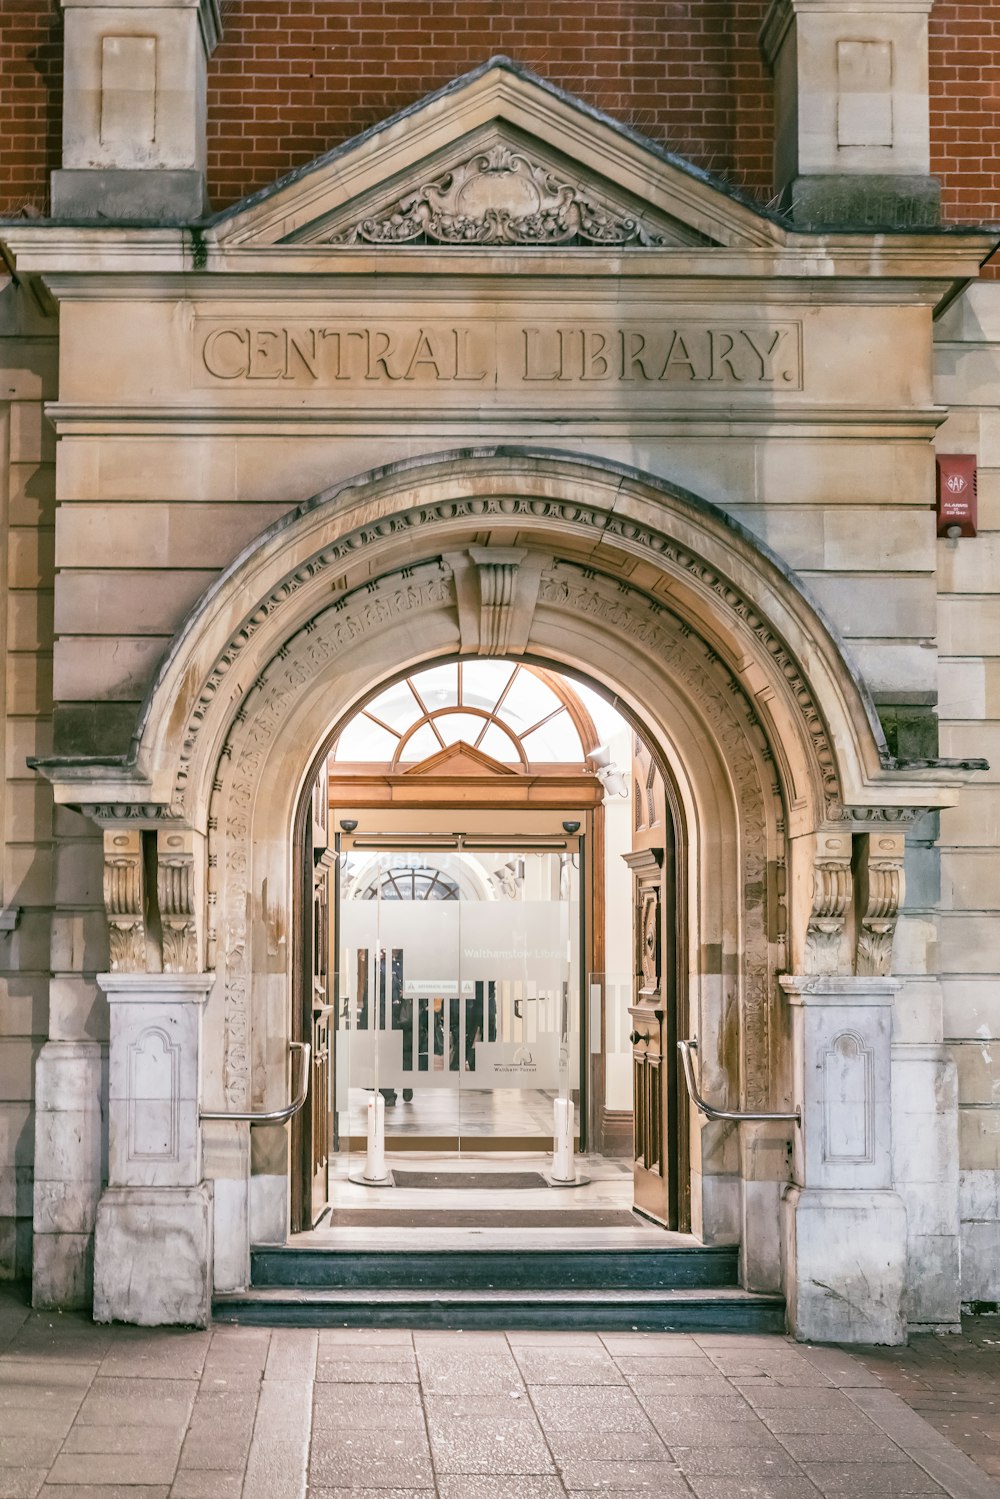 Central Library building